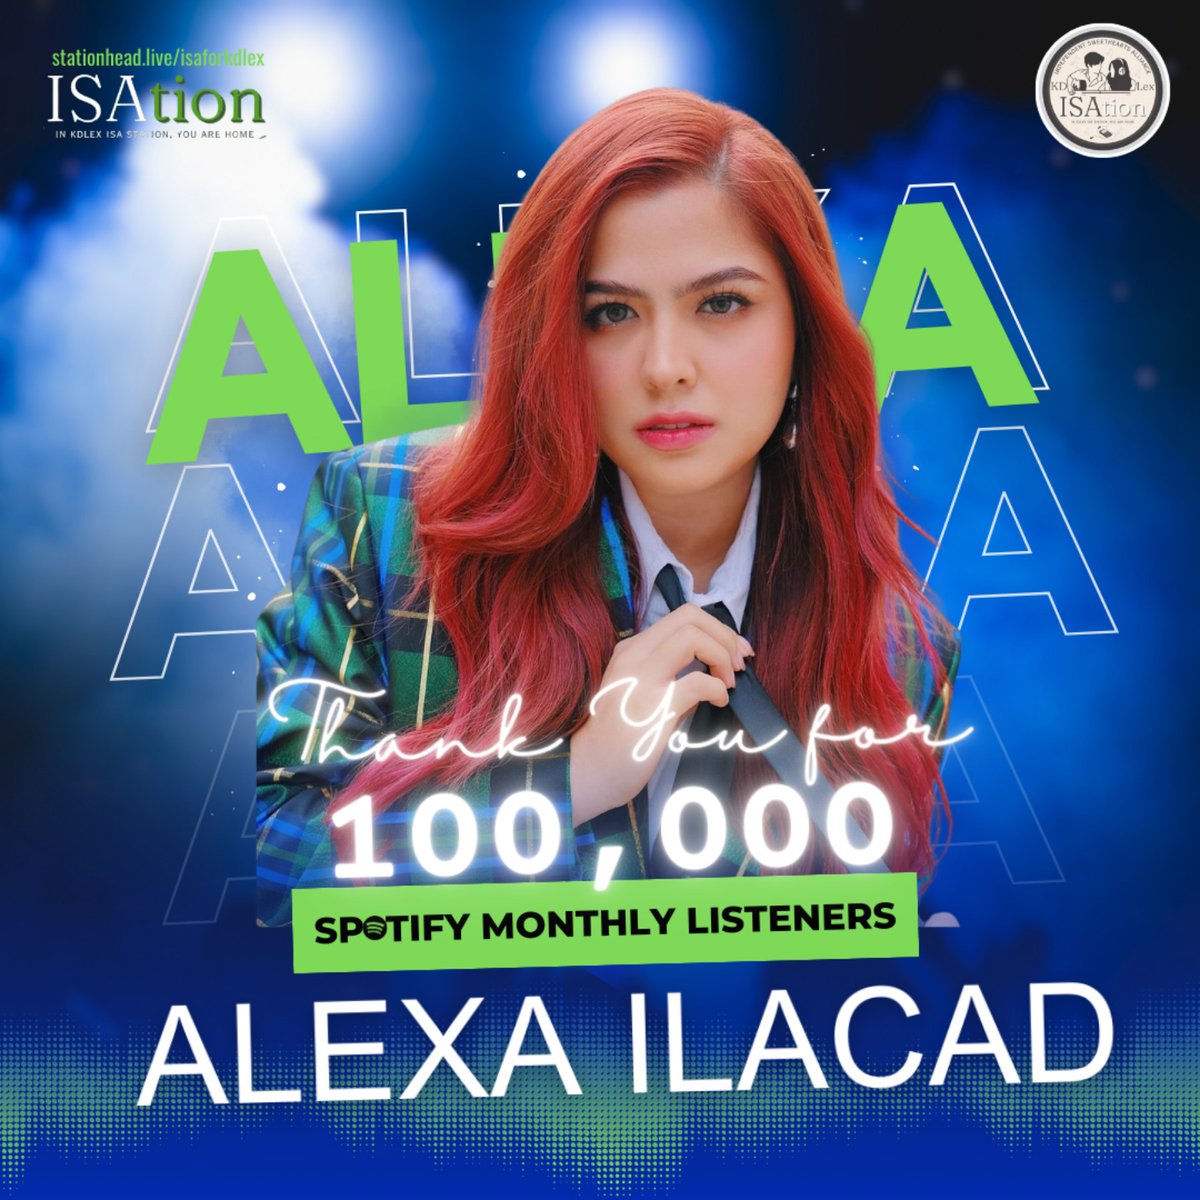 A huge congratulation on reaching 100,000 monthly listeners on spotify. This is a proud moment for all of us. Your achievement is a testament to your efforts and commitment. May you continue to inspire and reach even greater heights. 😍 @alexailacad #AddToHeartKDLEXConcert